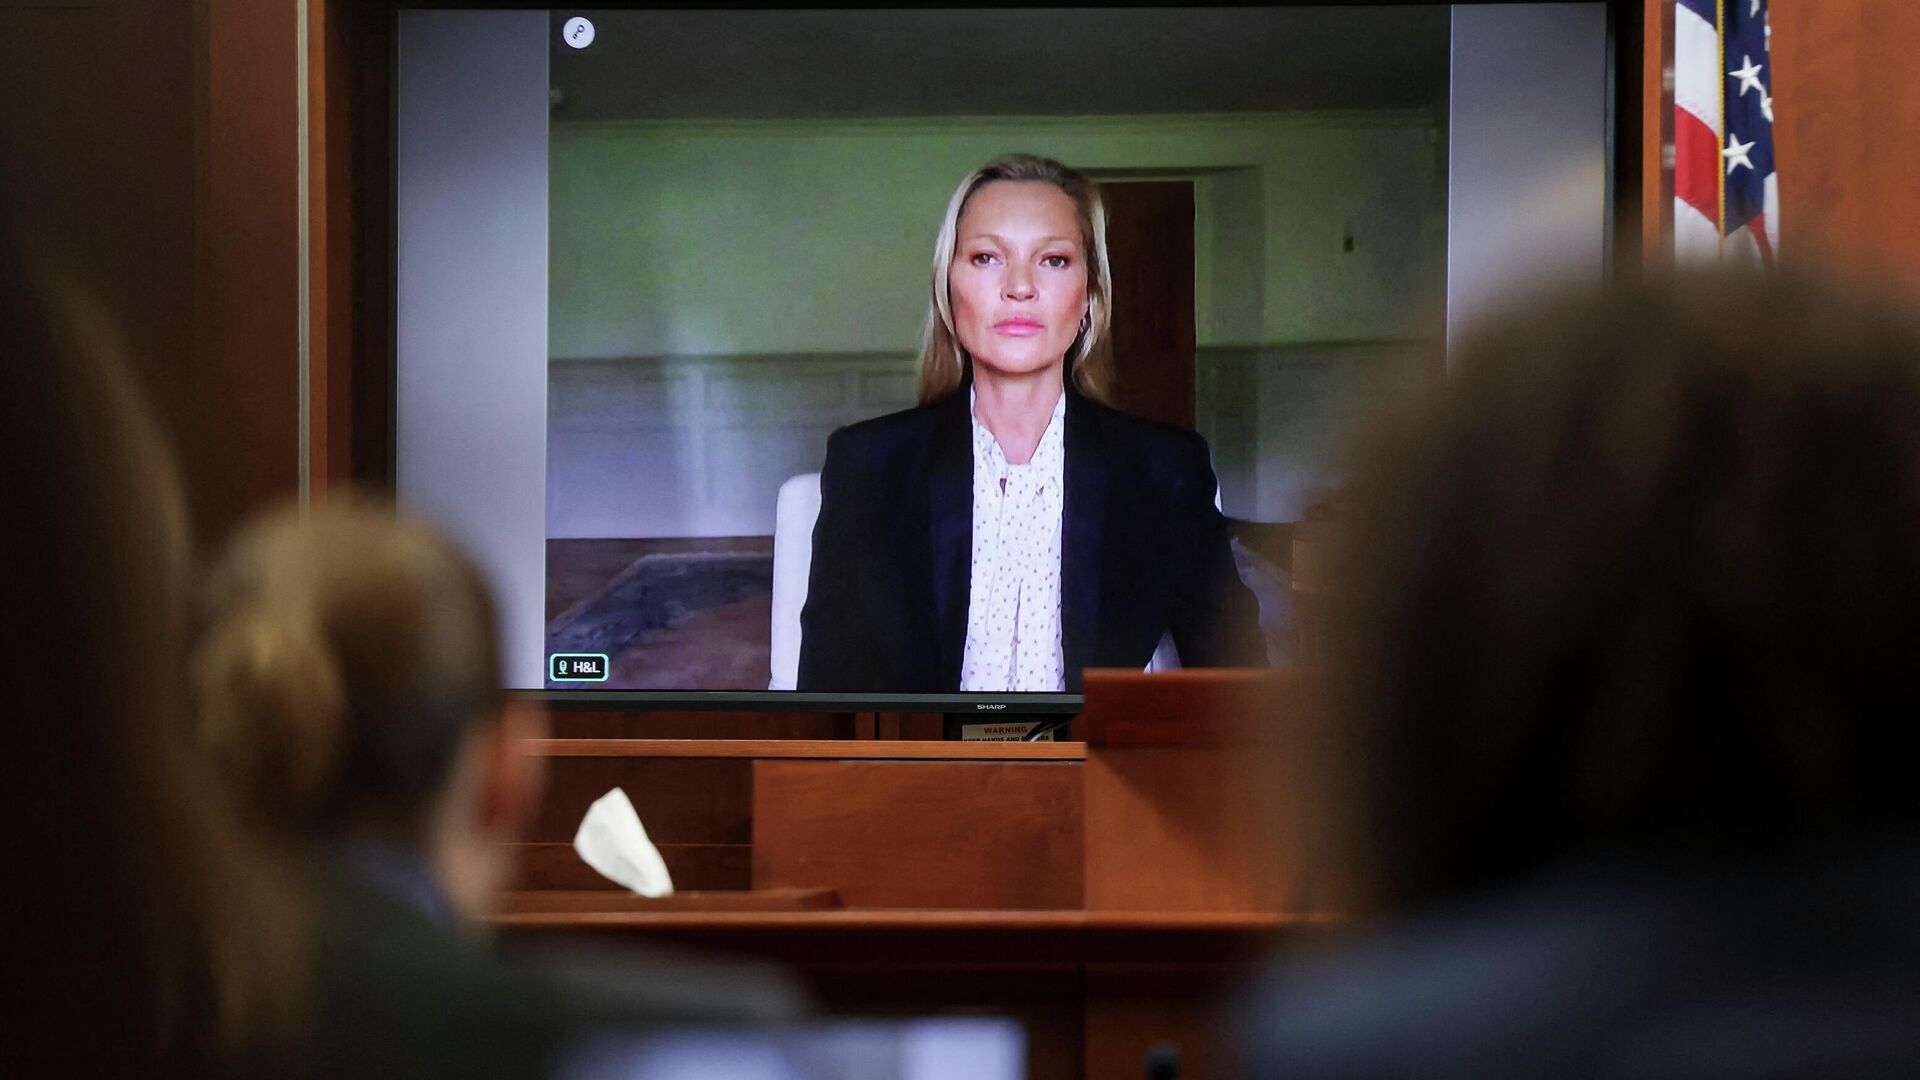 Model Kate Moss, a former girlfriend of actor Johnny Depp, testifies via video link at the Fairfax County Circuit Courthouse in Fairfax, Va., Wednesday, May 25, 2022 - Sputnik International, 1920, 25.05.2022